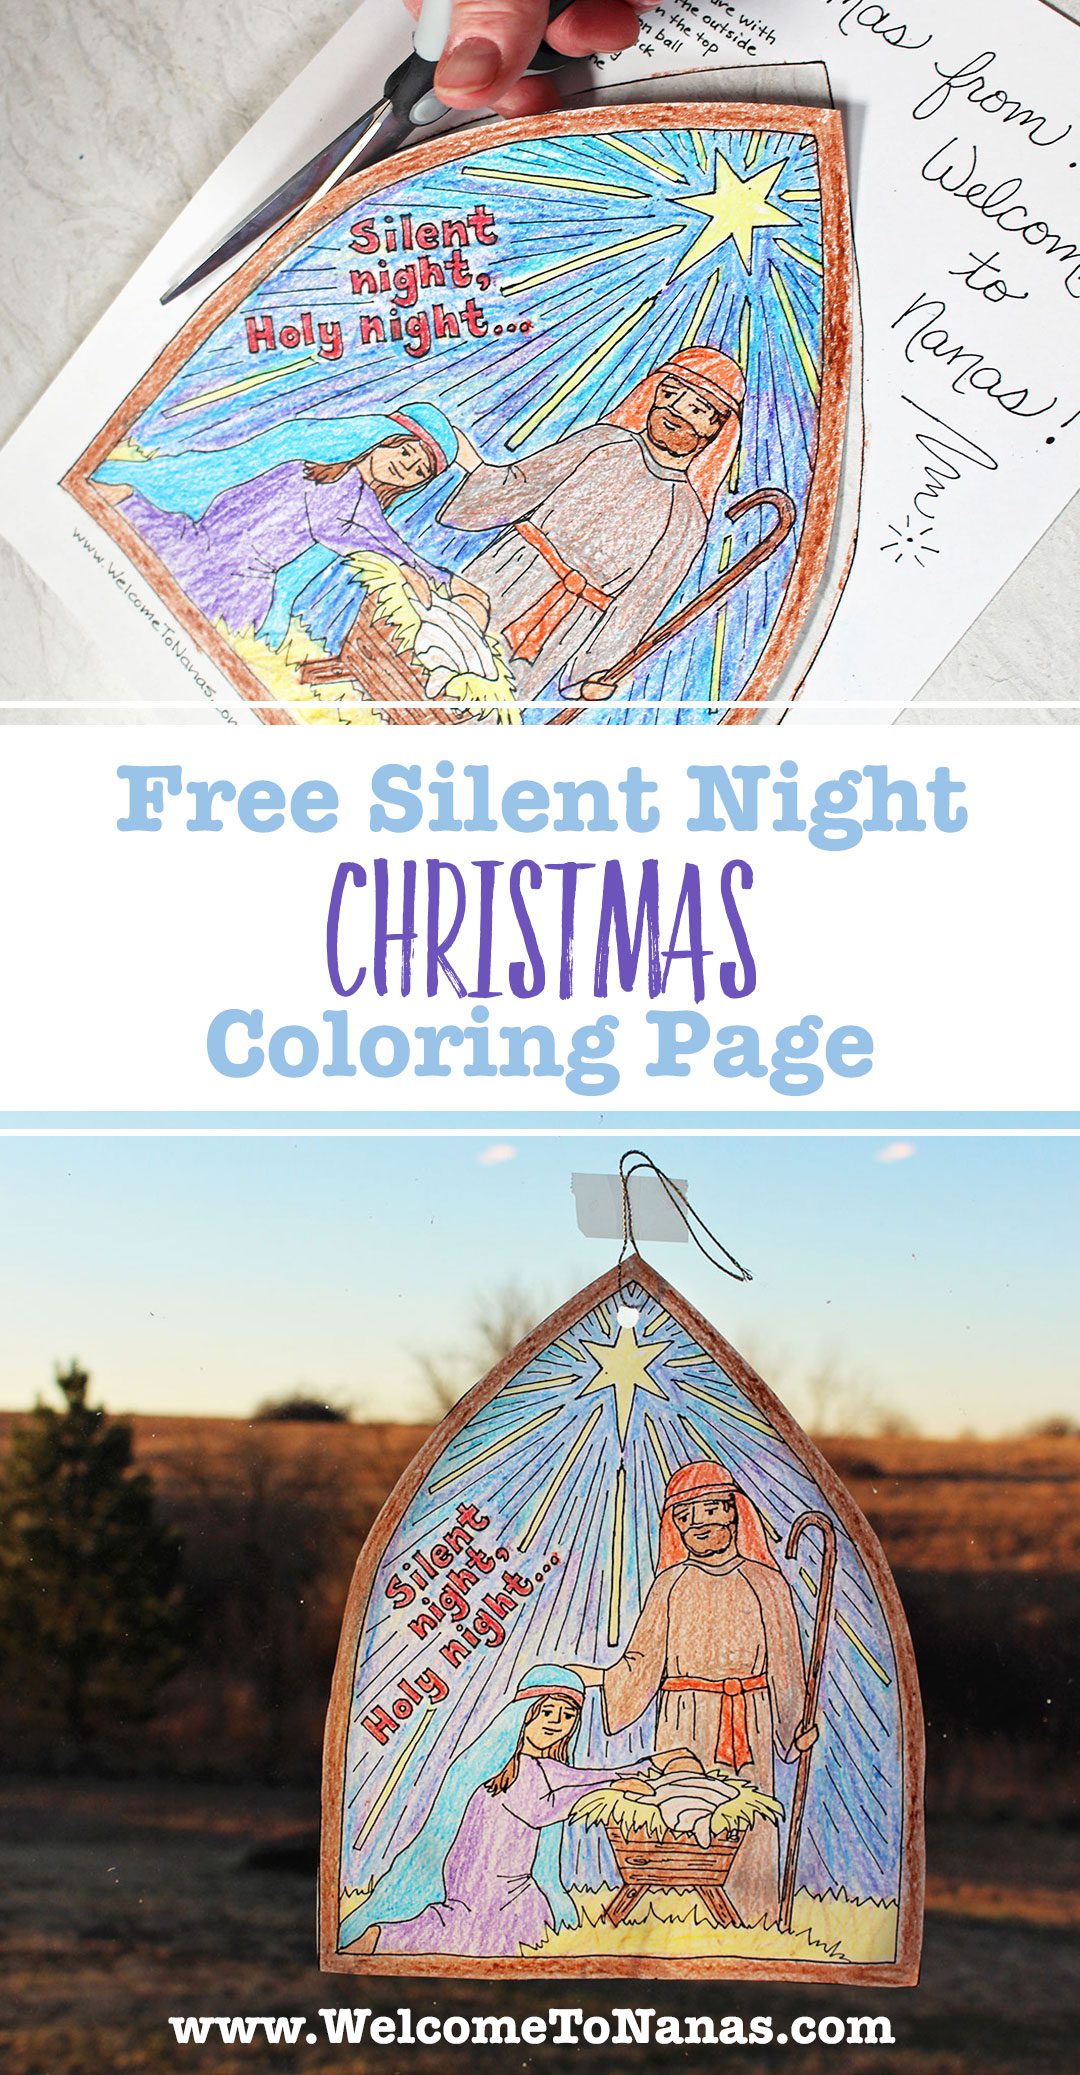 Finished Silent Night Christmas Coloring Page hanging on the window.